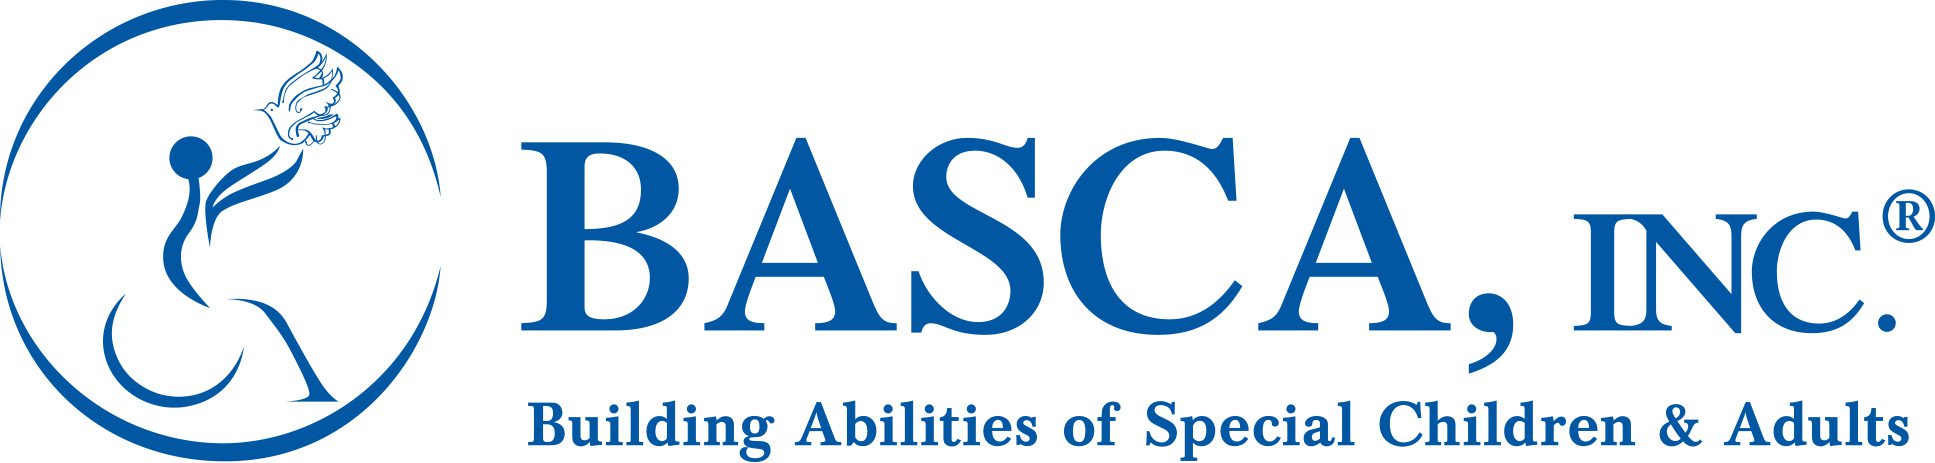 BASCA Inc's logo, with the caption, "BASCA Inc, Building Abilities of Special Children and Adults"